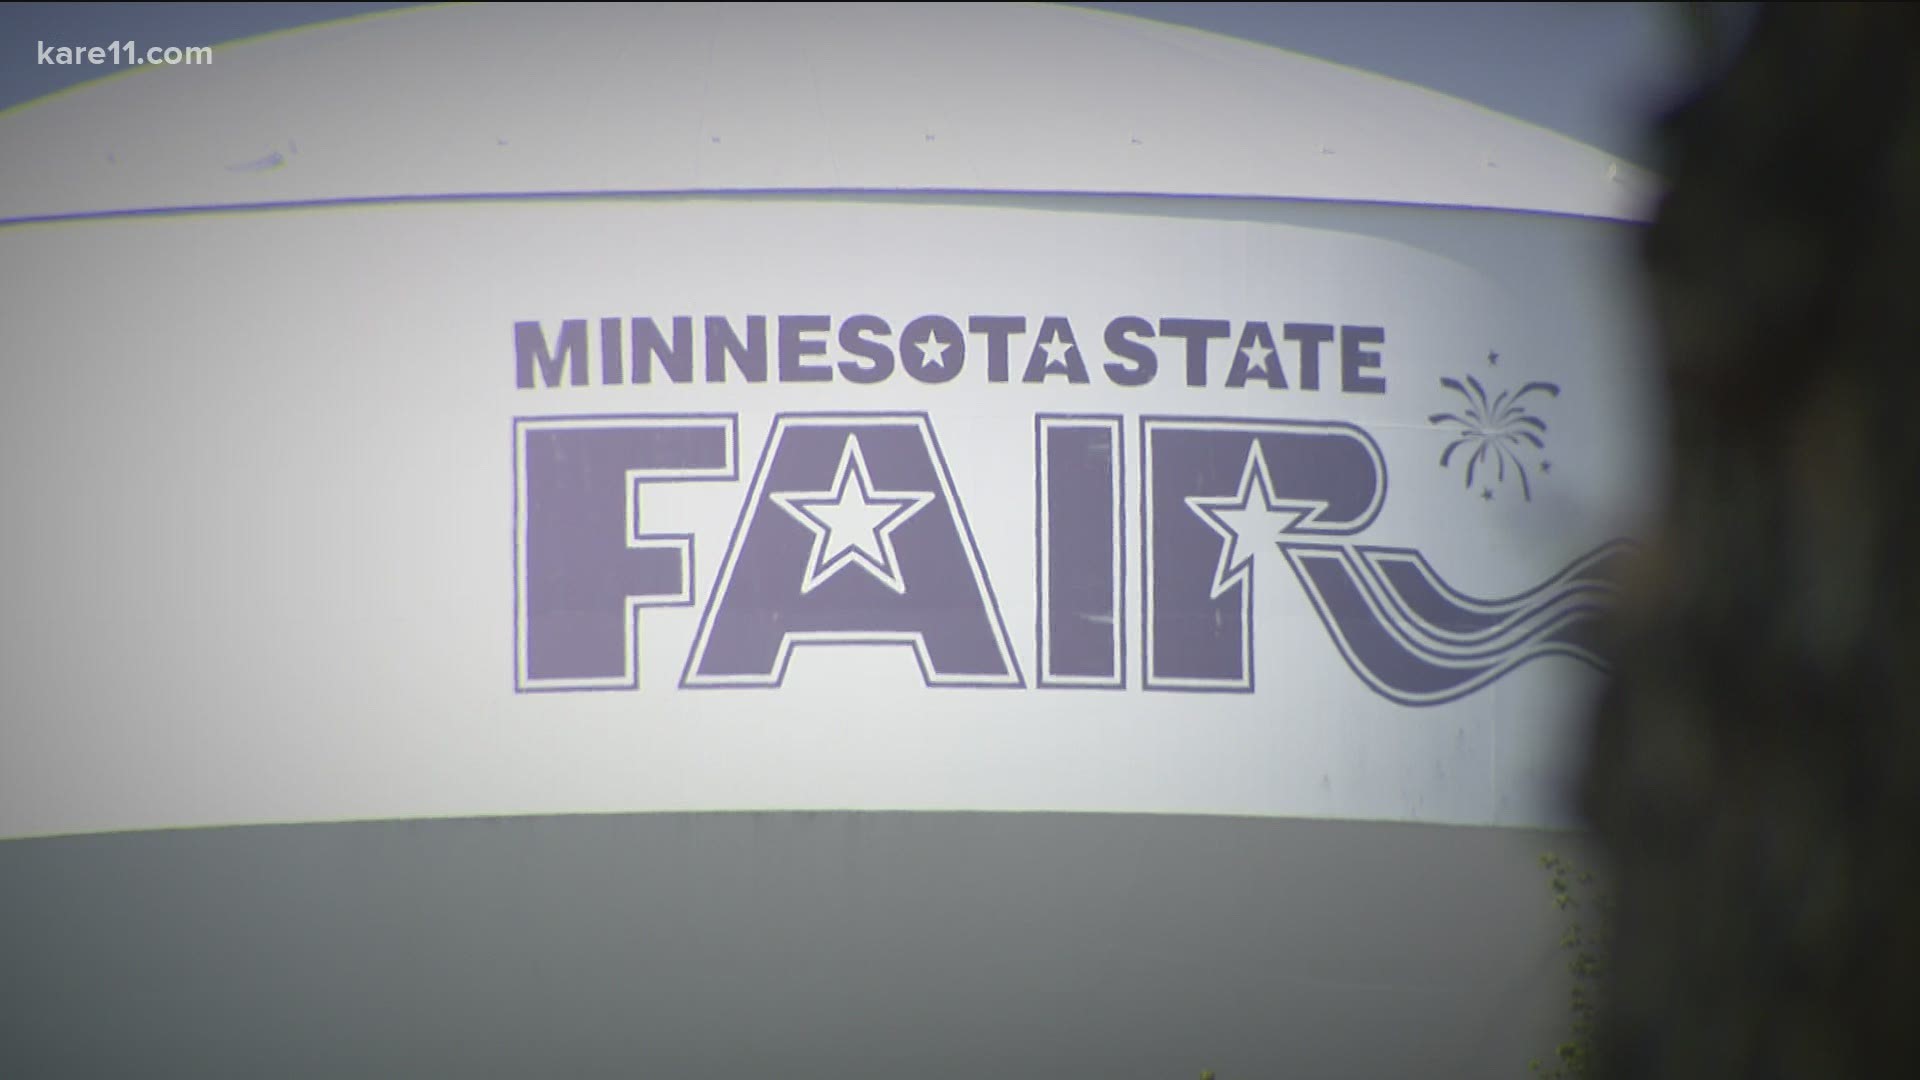 The Ramsey County Sheriff's Office has been tasked to take over security, following the elimination of the fair's own police.